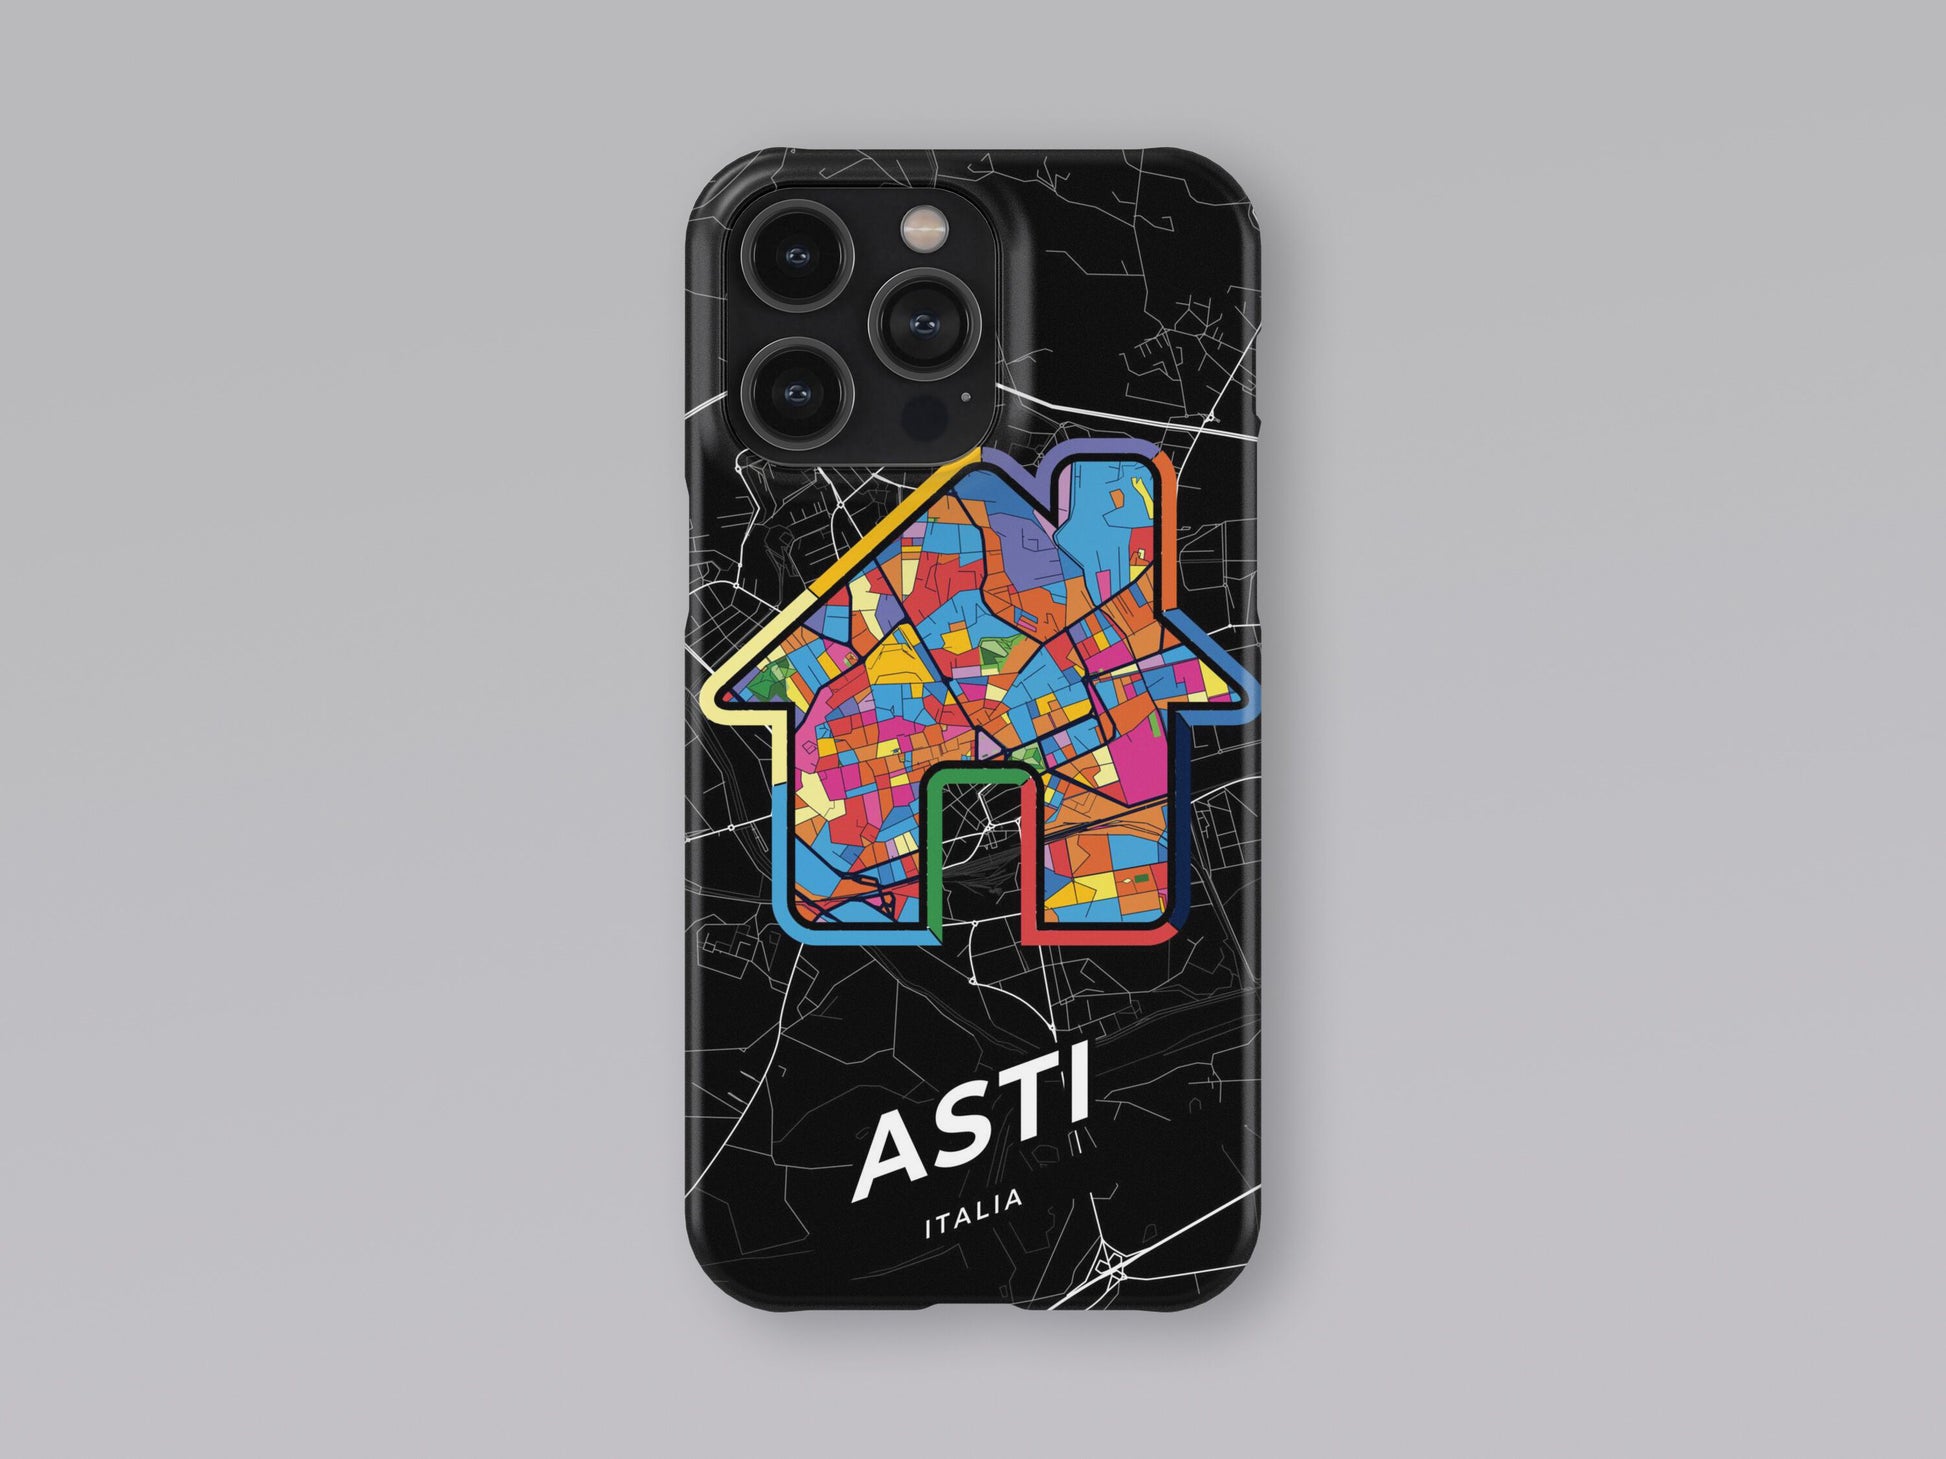 Asti Italy slim phone case with colorful icon. Birthday, wedding or housewarming gift. Couple match cases. 3